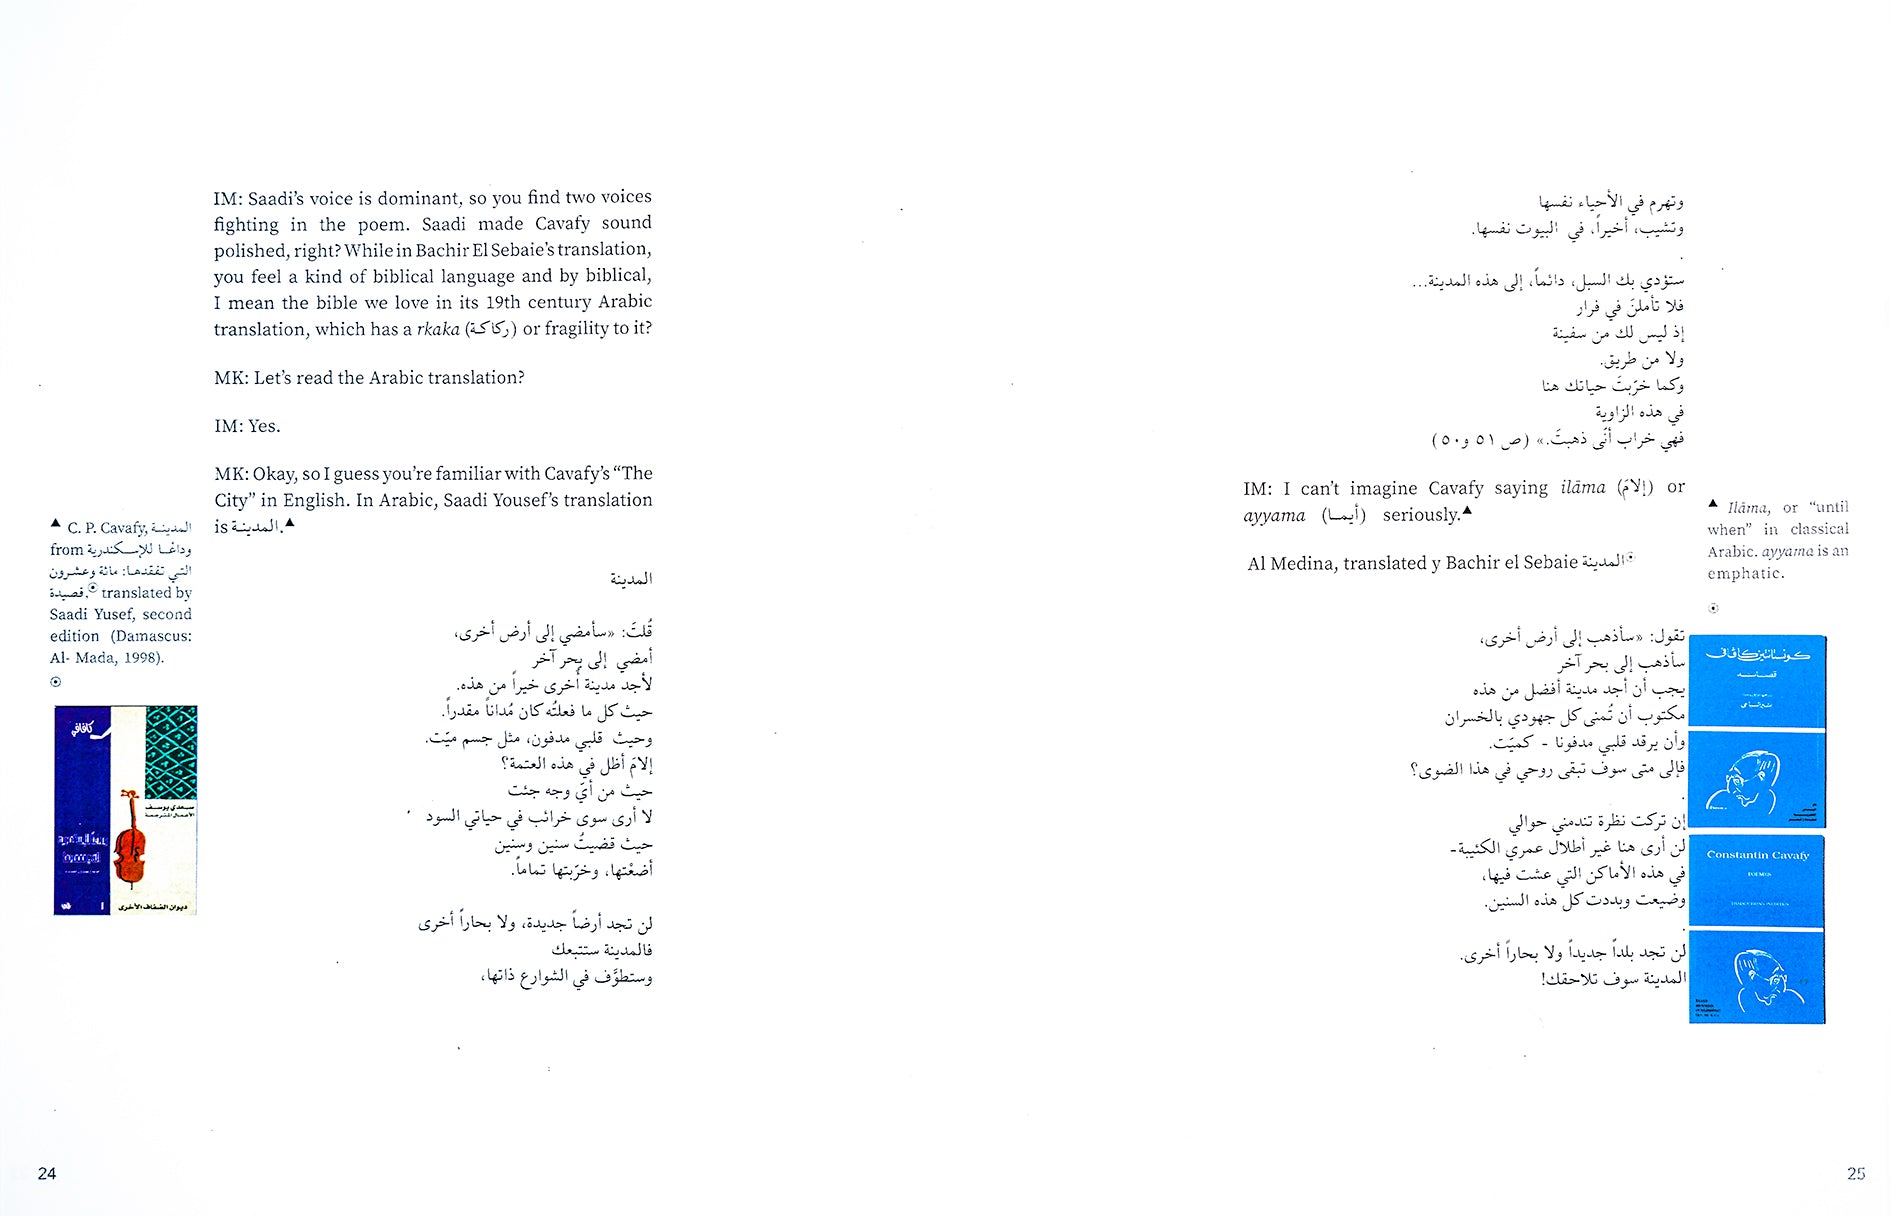 Book spread in monochrome white. The left page has a short column of black serif english text in the upper left corner and a small graph on the outer rim of the page. On the lower half of the page is a short paragraph in Arabic. The right page contains four small blue boxes on the lower right corner of the page and a column of text both in the arabic and latin alphabet.